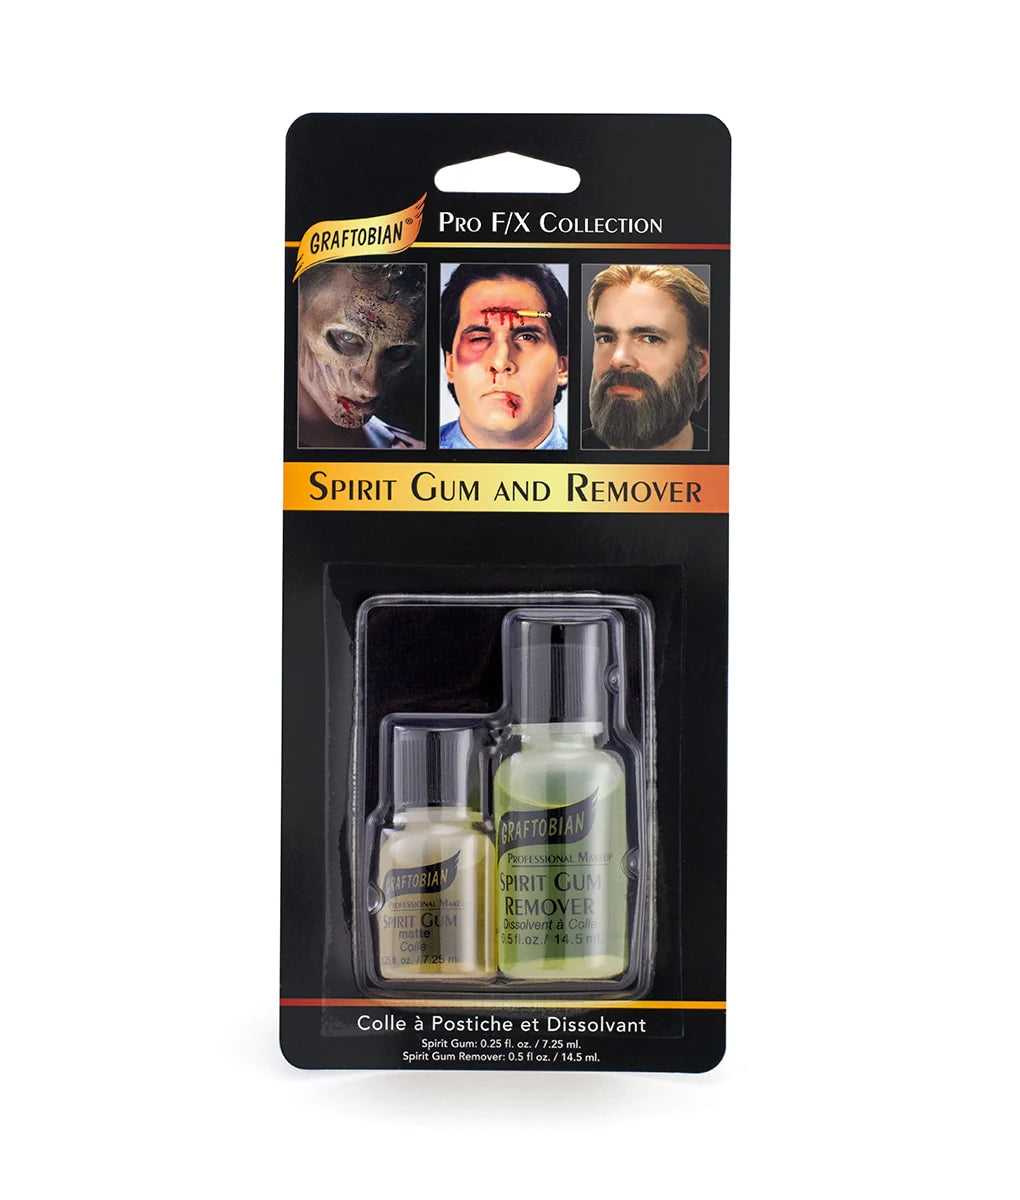 Spirit Gum Adhesive and Remover - Combo Pack of 0.5 Fl. Oz. Prosthetic Skin  Adhesive & 0.5 Fl. Oz Spirit Gum Remover 